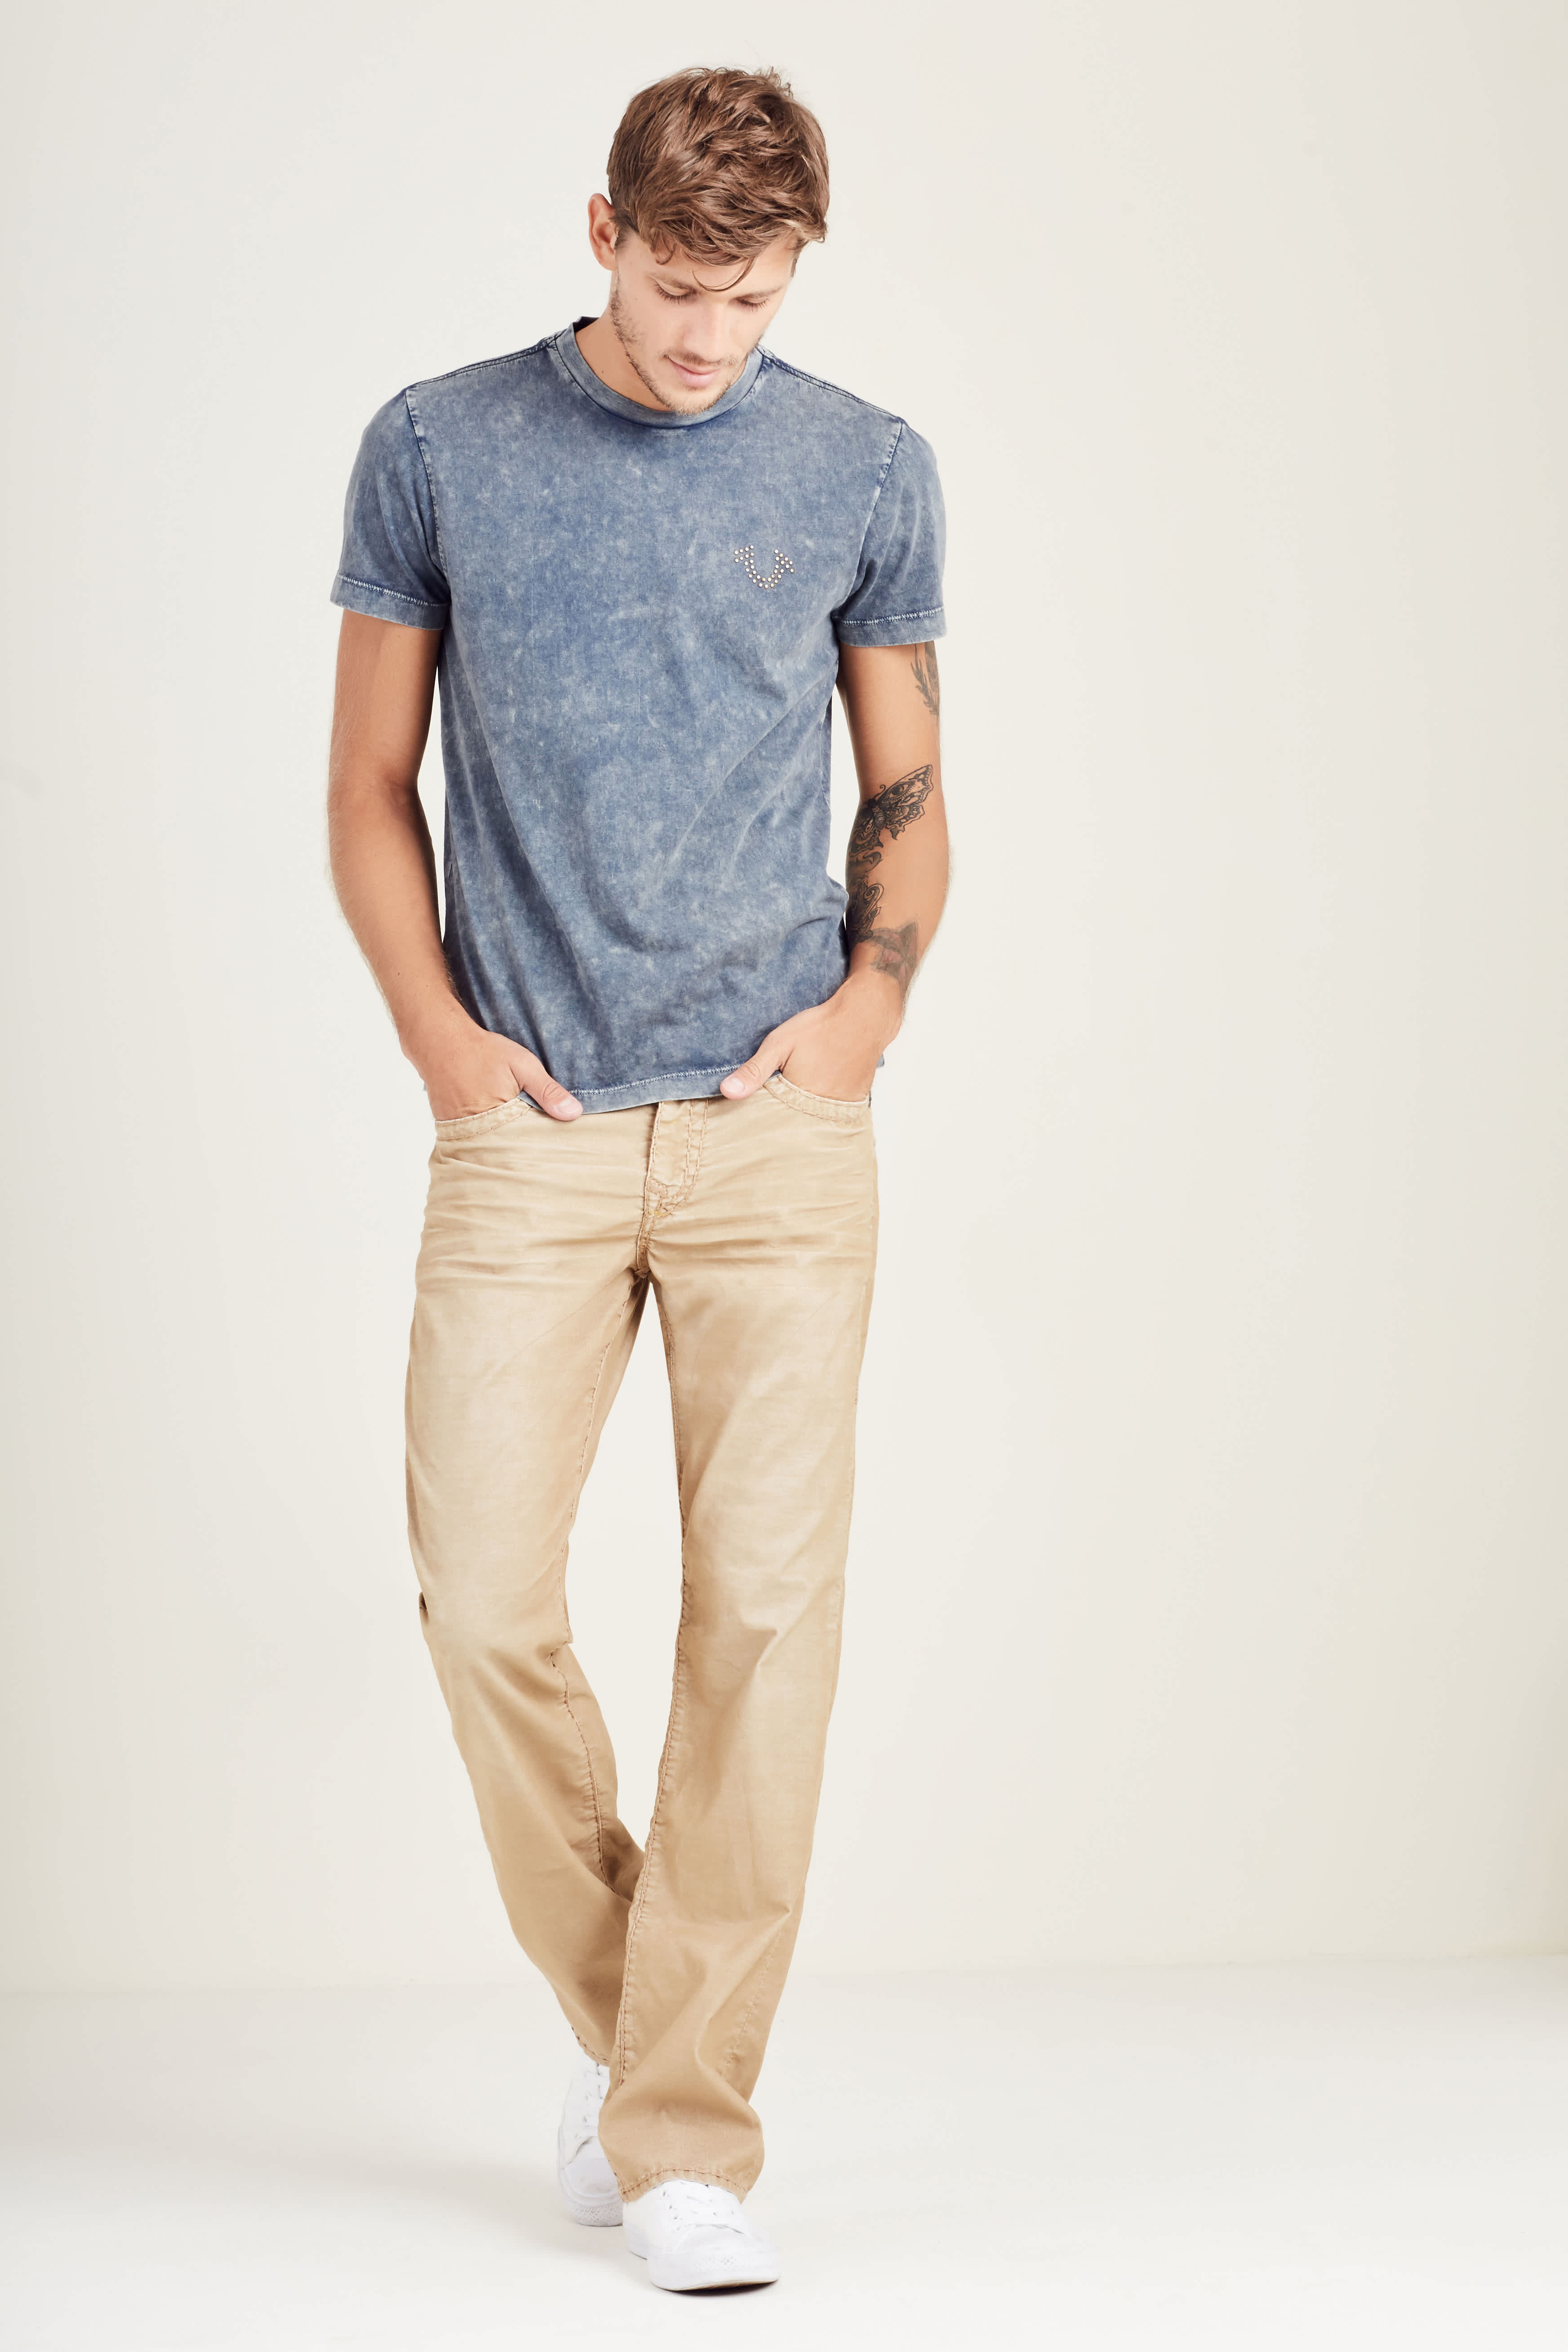 HAND PICKED STRAIGHT CORDUROY SUPER T MENS PANT